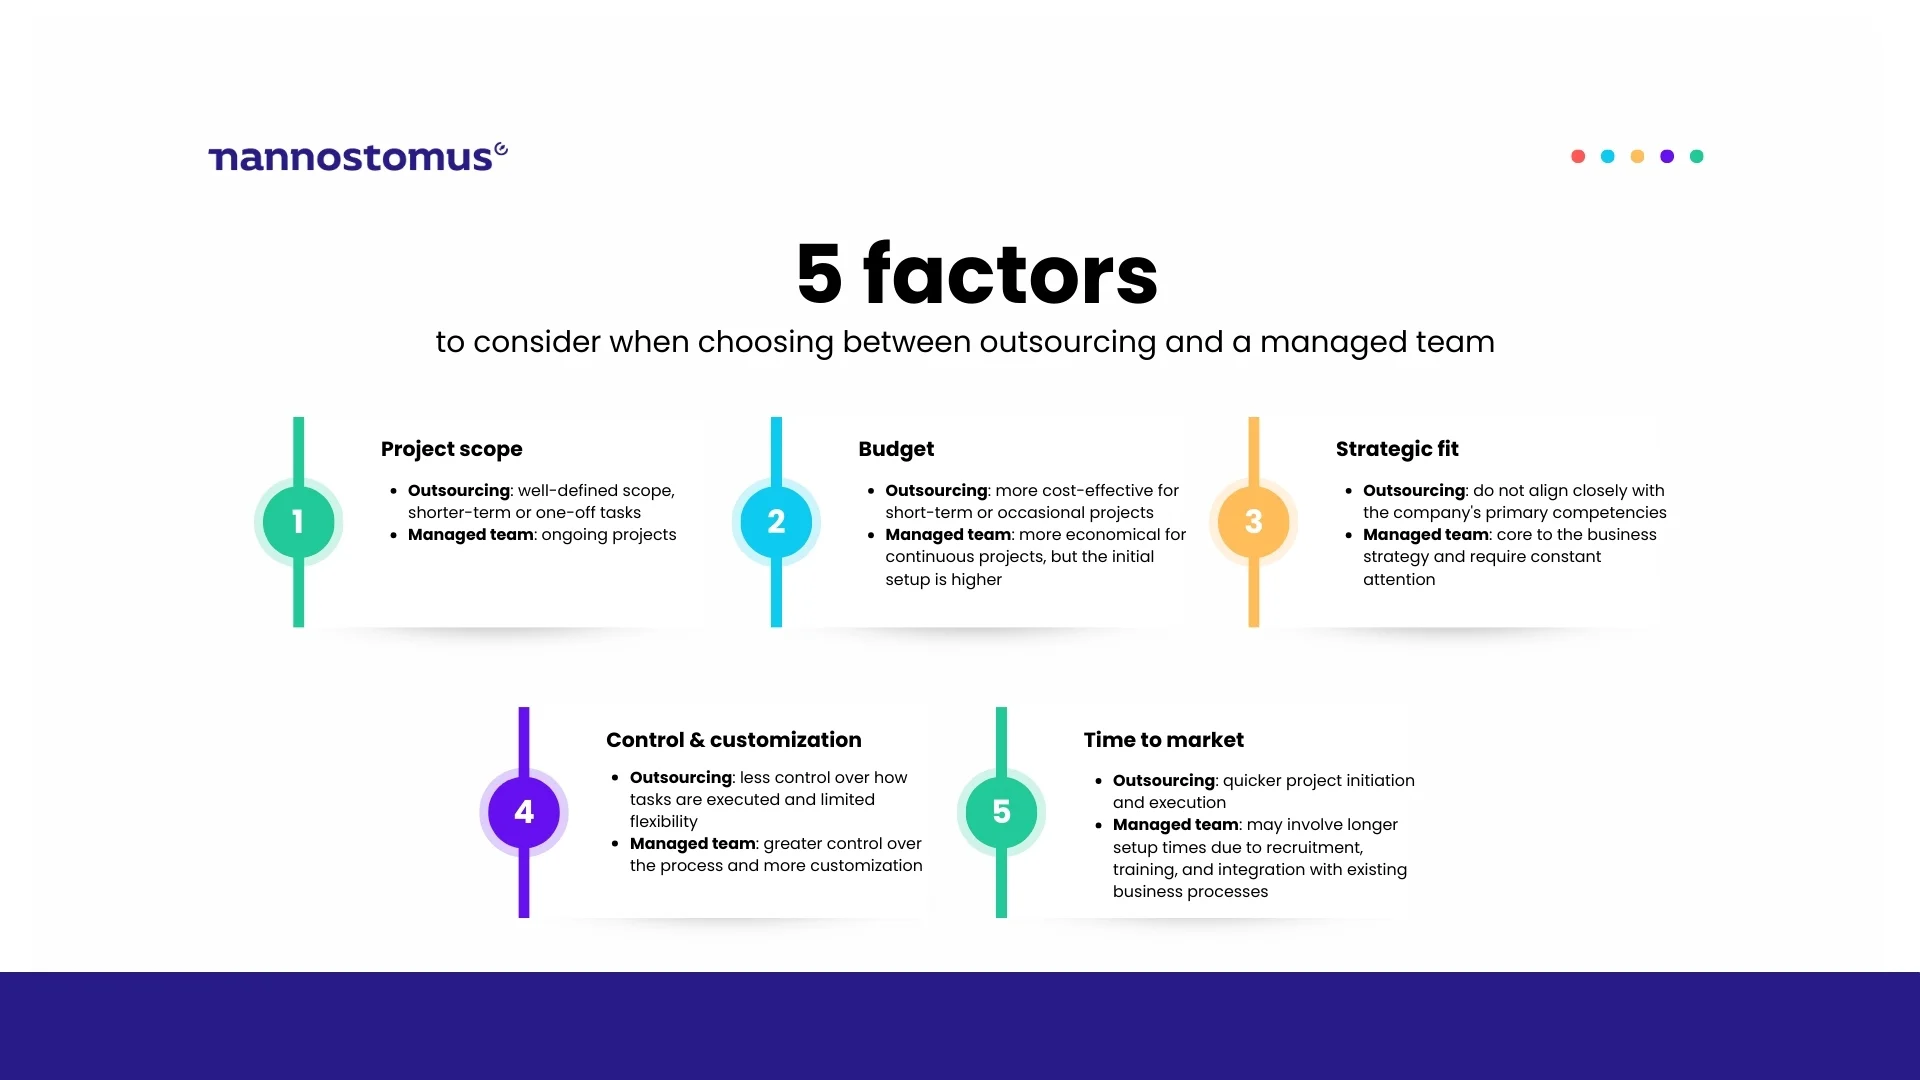 Key factors to consider when choosing between outsourcing and managed team